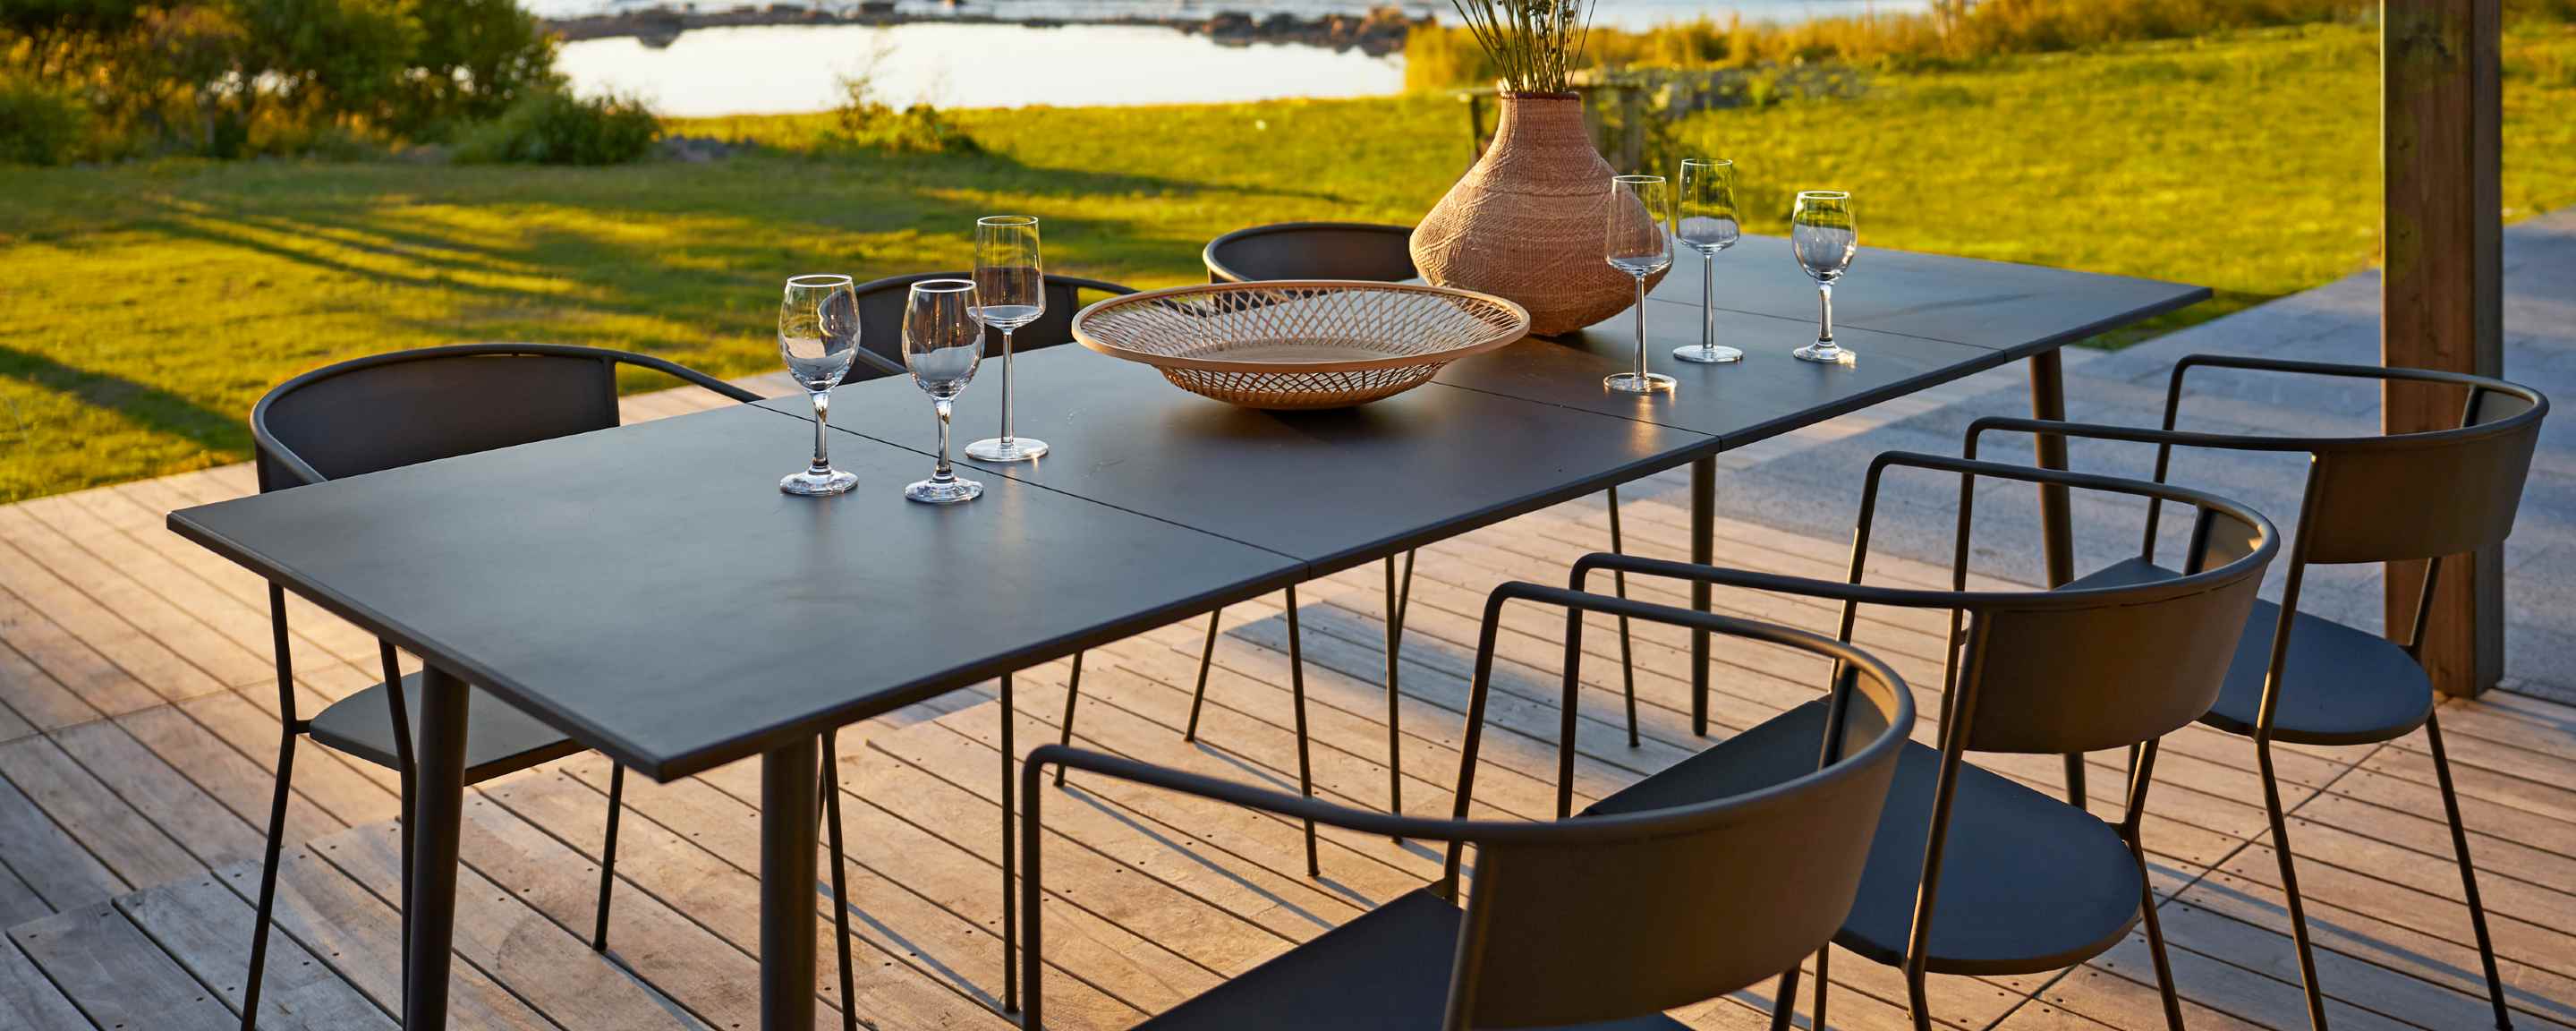 the salto large dining table